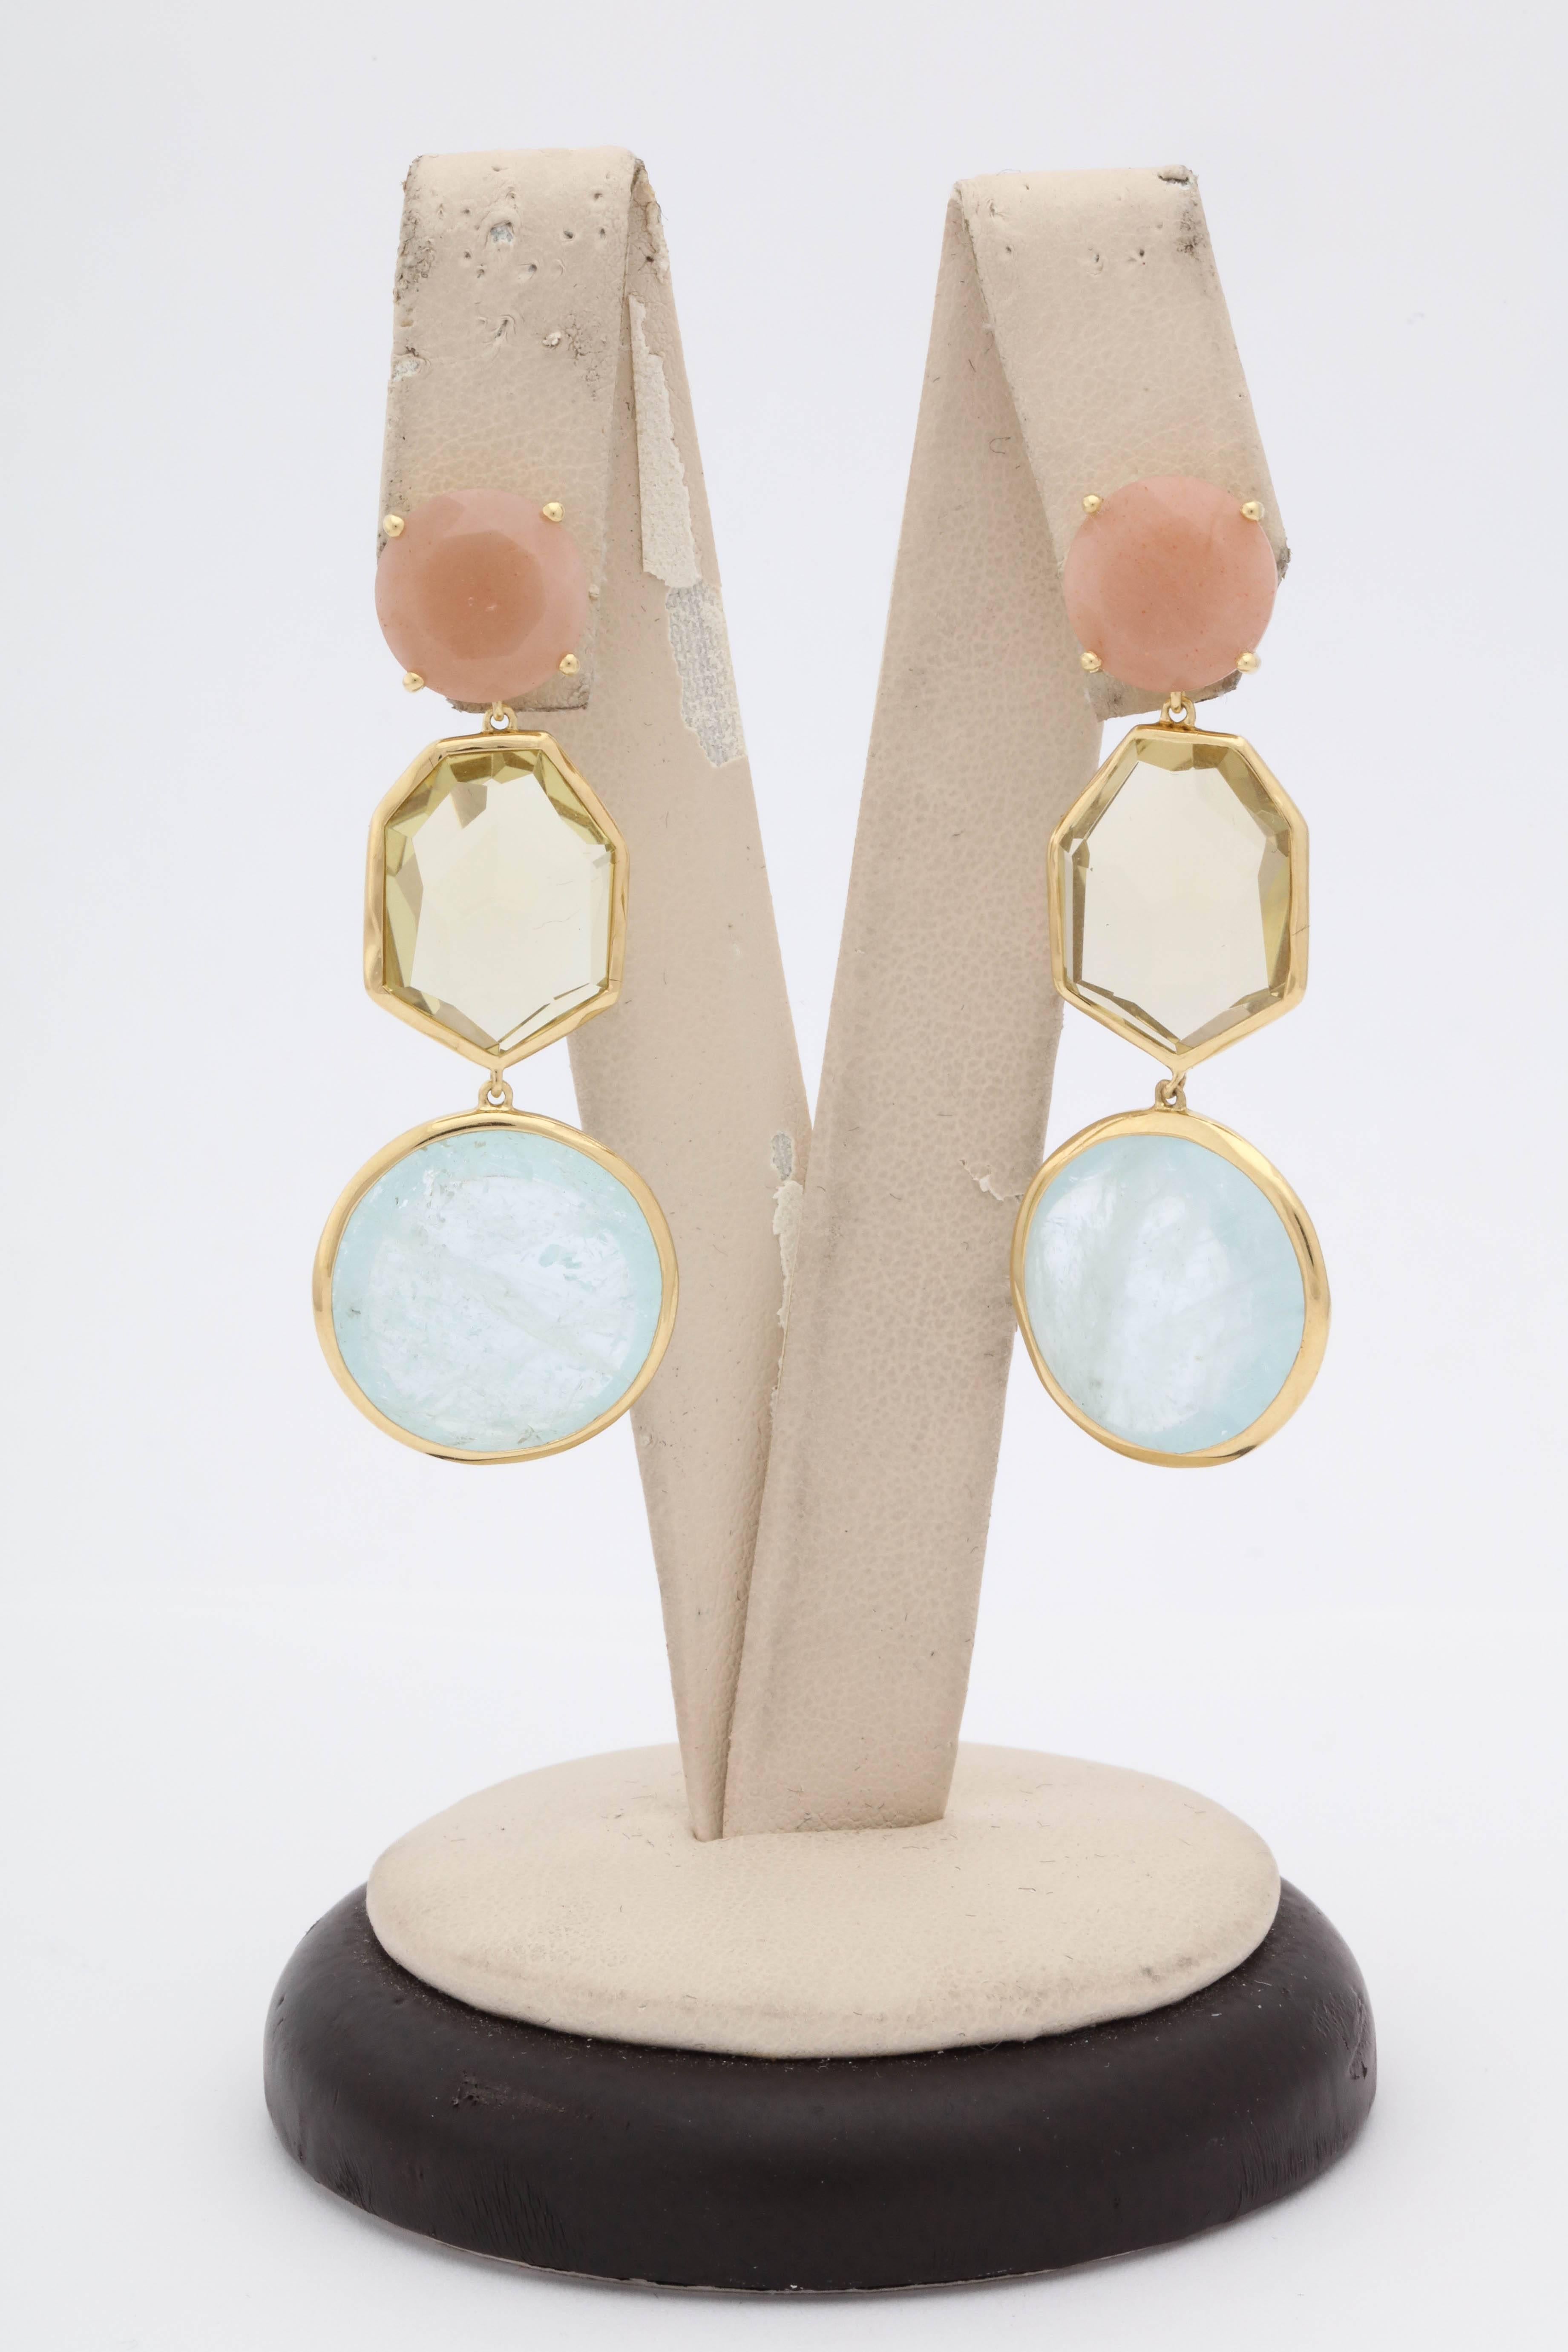 One Pair Of Ladies 18kt Yellow Gold Flexible Dangle Earrings Embellished With Two Prong Set Pastel Color Faceted Rose Quartz Stones And With Two Octangular Shaped Bezel Set Citrine Stones. Further Designed With Two Cabochon Pastel Color Bezel Set